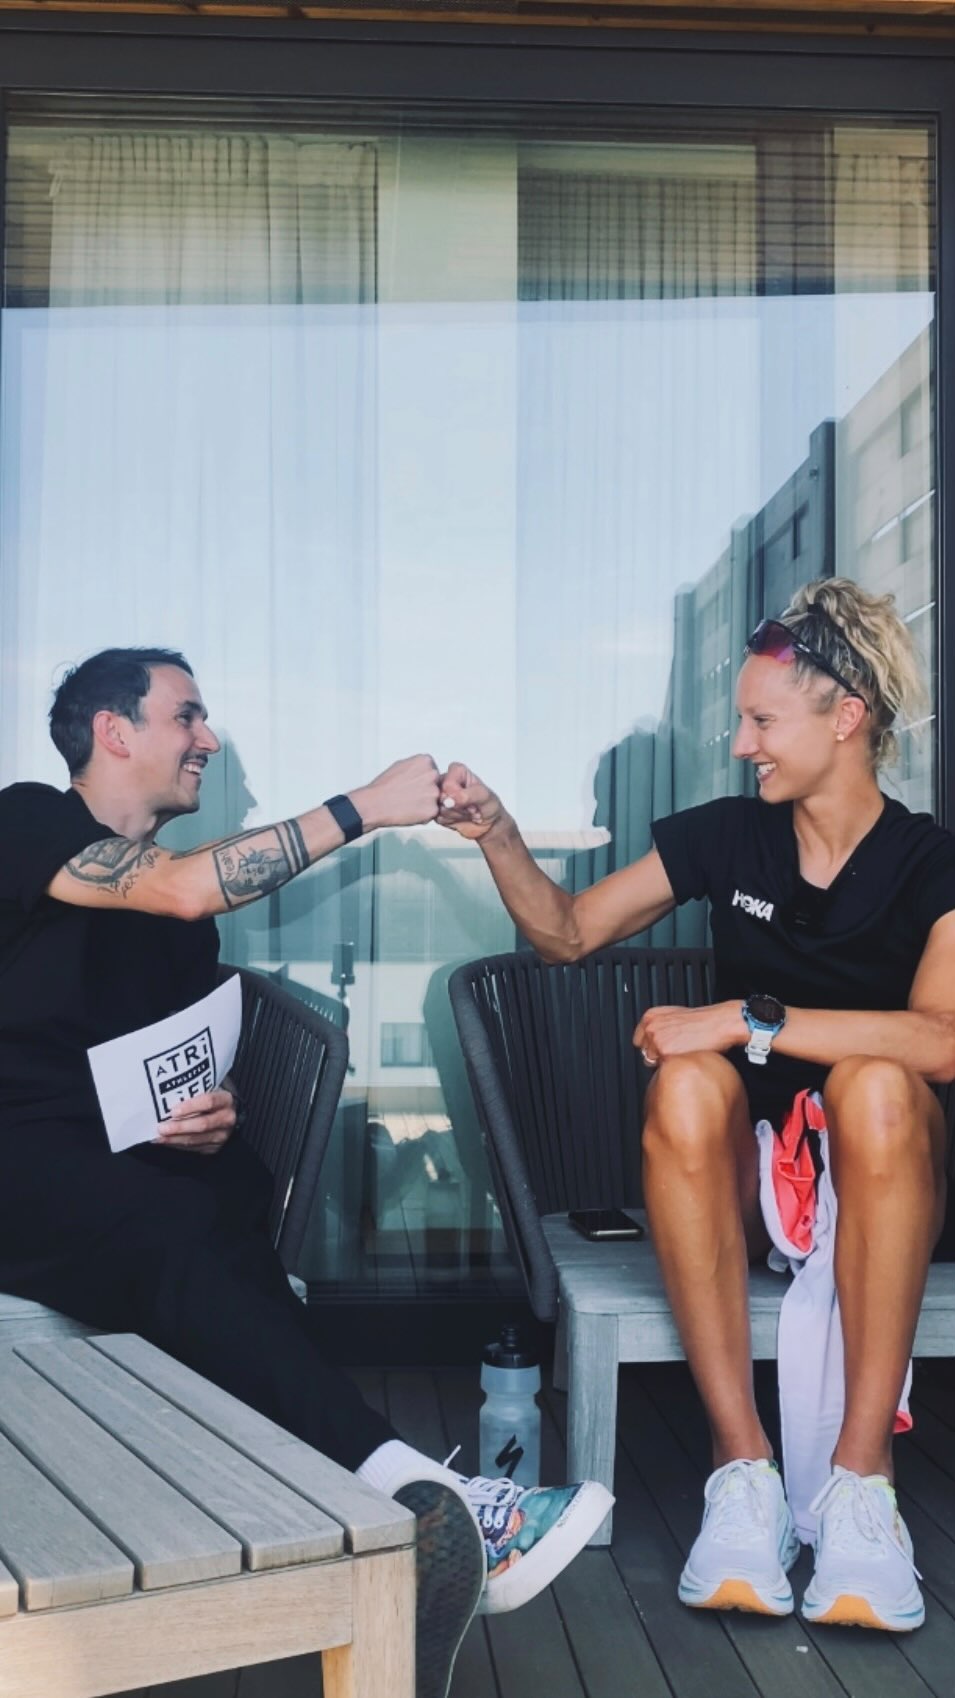 #RaceWeekRadio is in full swing 🎙. Let’s start with the one and only @em_pallant ! Already a legend, always smiling and definitely one of the toughest athletes around. Here you get some tips for young athletes and of course some questions and answers that are not tooooo much about Triathlon. Thanks for taking the time, Emma! 

Enjoy the interview and excuse my bad English. I’ll put all of the interviews on YouTube next week in better quality. 

Almost #RaceDay 😍

@challengefamily @challengesamorin 

#triathlon #triathletes #swimbikefun #challengefamily #letsgo